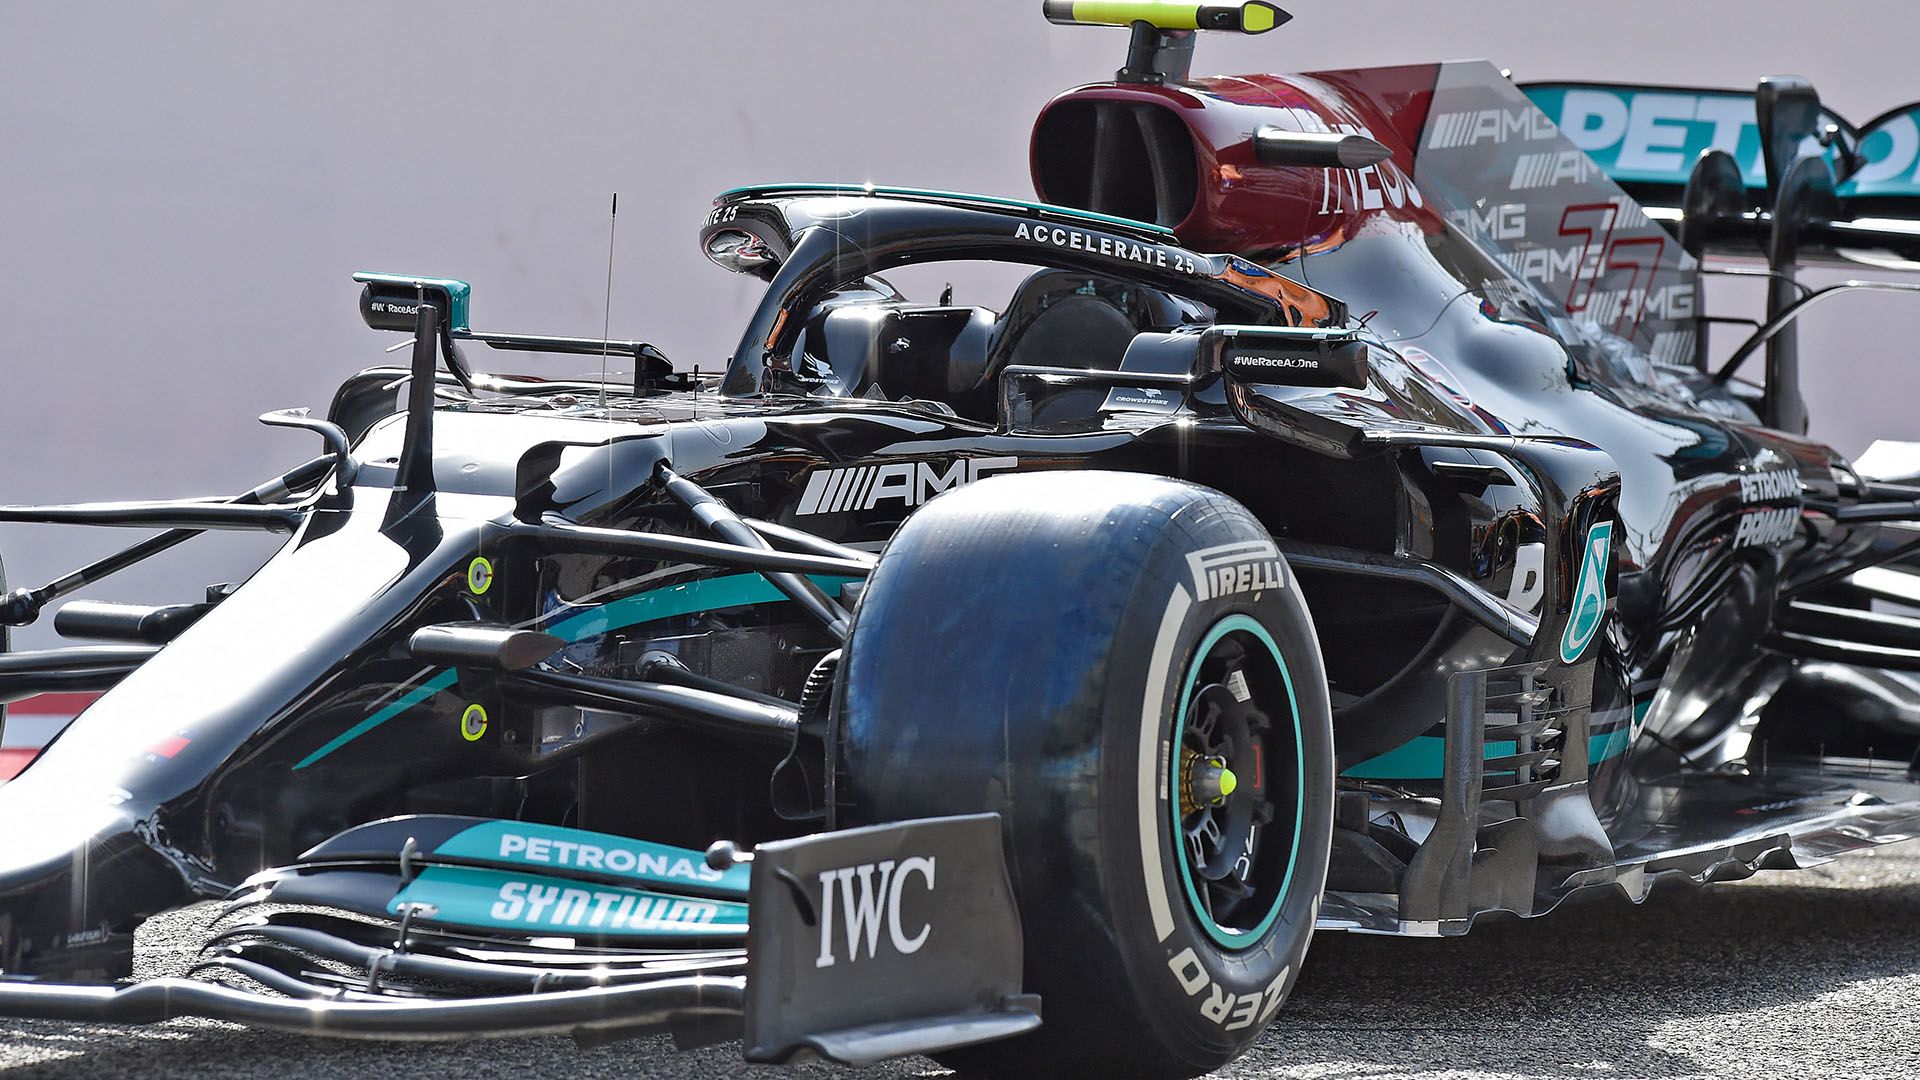 REVEALED: Mercedes' secret floor breaks cover as the W12 hits the track at testing. Formula 1®